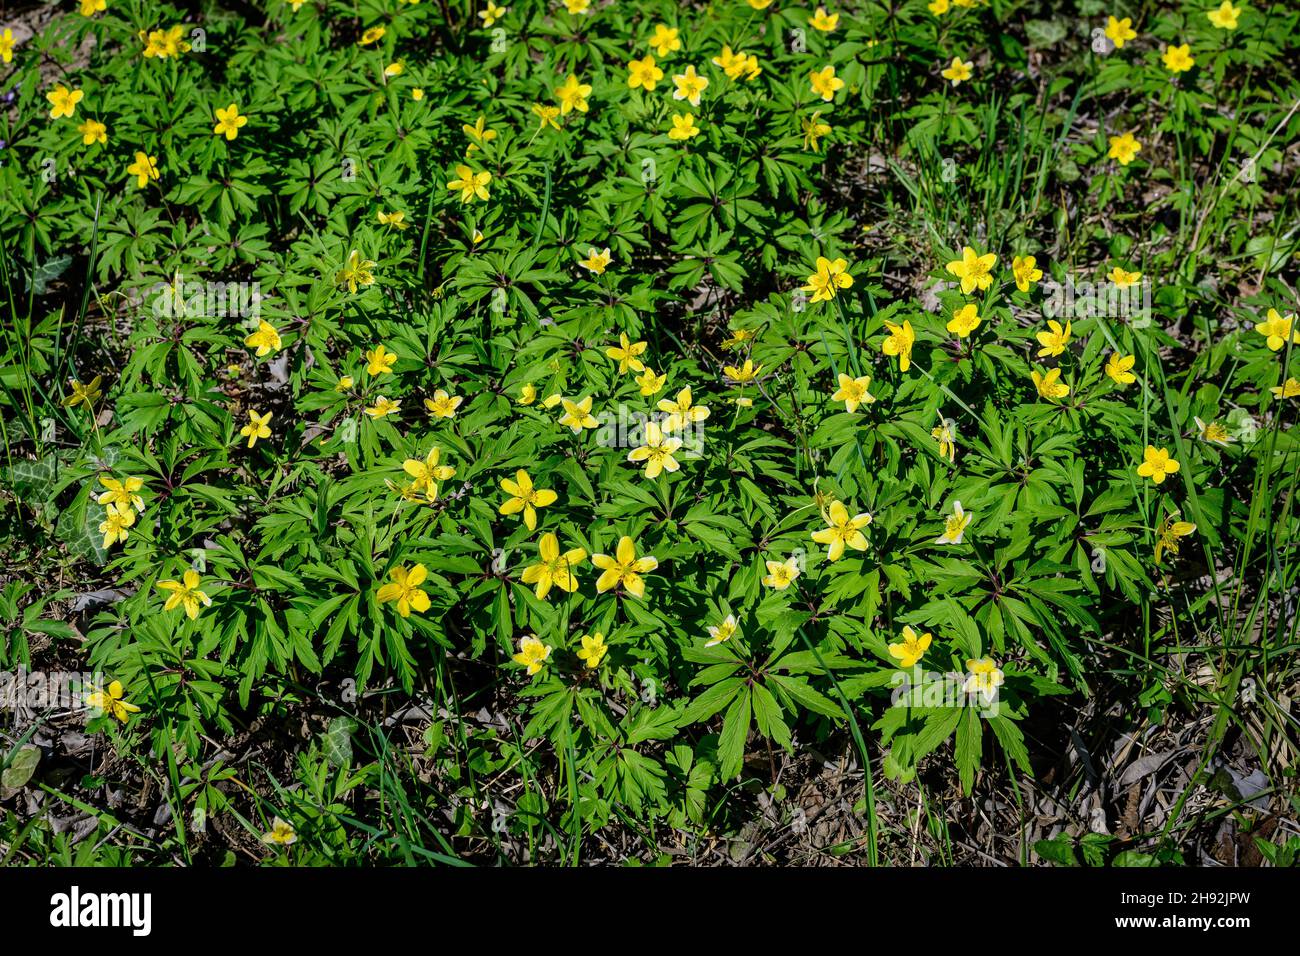 Many delicate yellow flowers of Ranunculus repens plant commonly known as the creeping buttercup, creeping crowfoot or sitfast, in a forest in a sunny Stock Photo